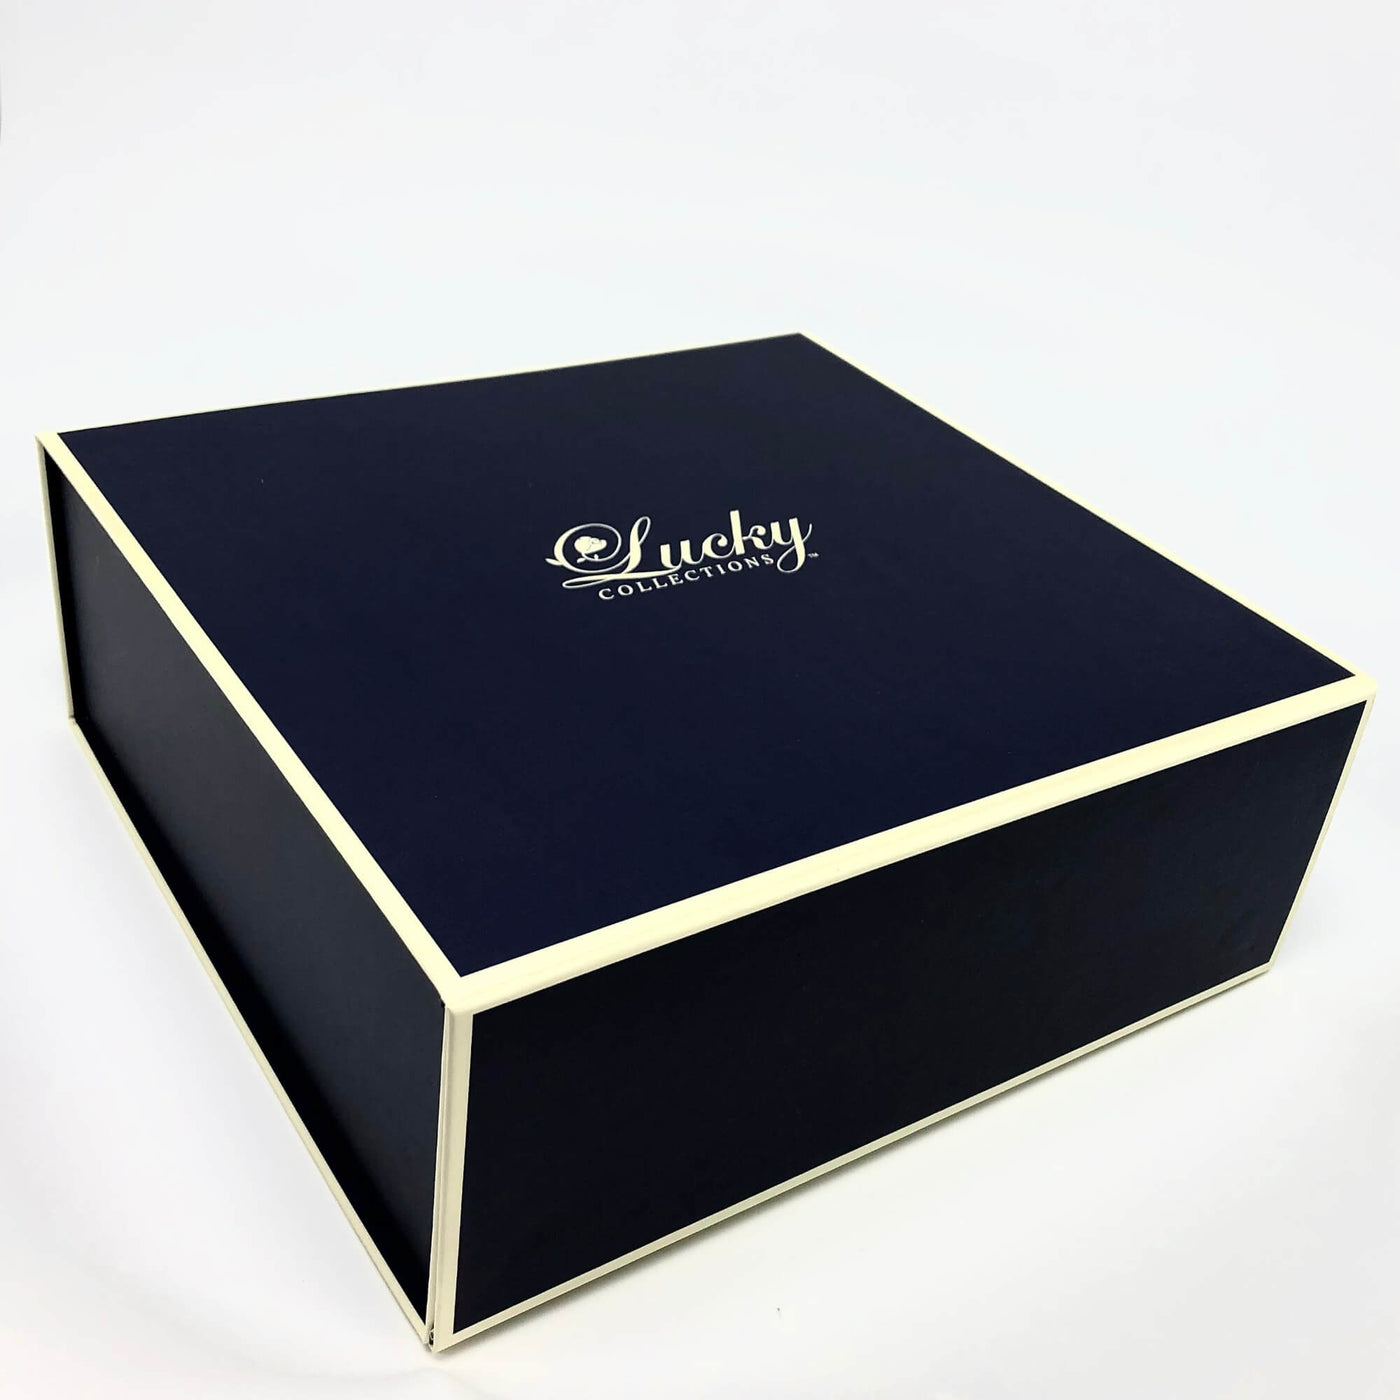 Tiara comes in Custom Box for convenient presentation & keepsake Lucky Collections 